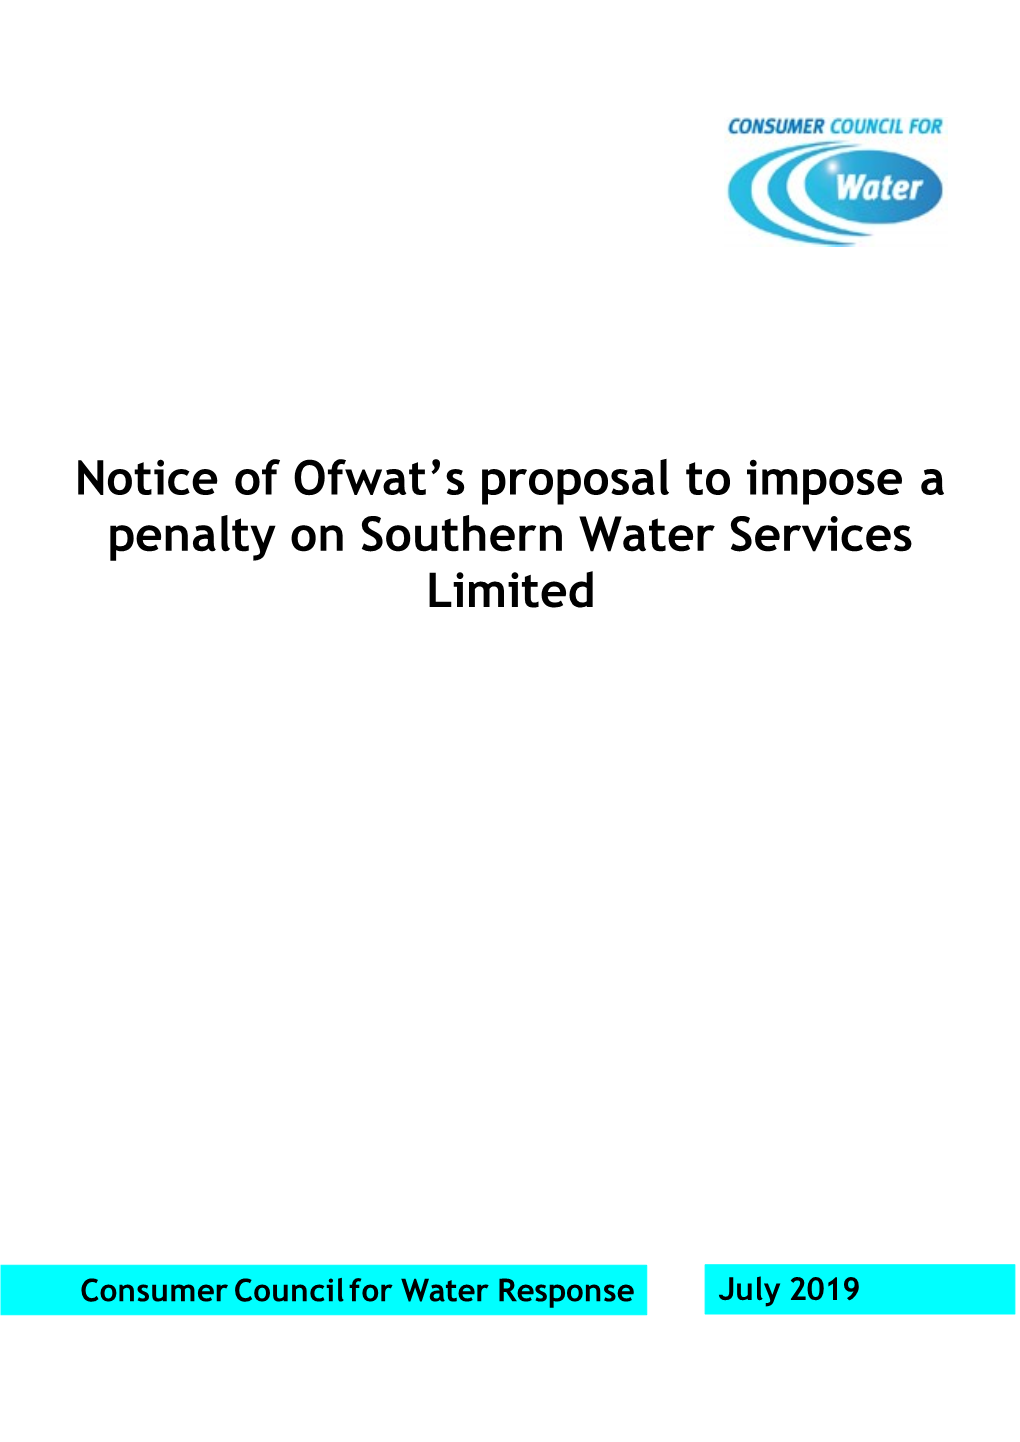 Notice of Ofwat's Proposal to Impose a Penalty on Southern Water